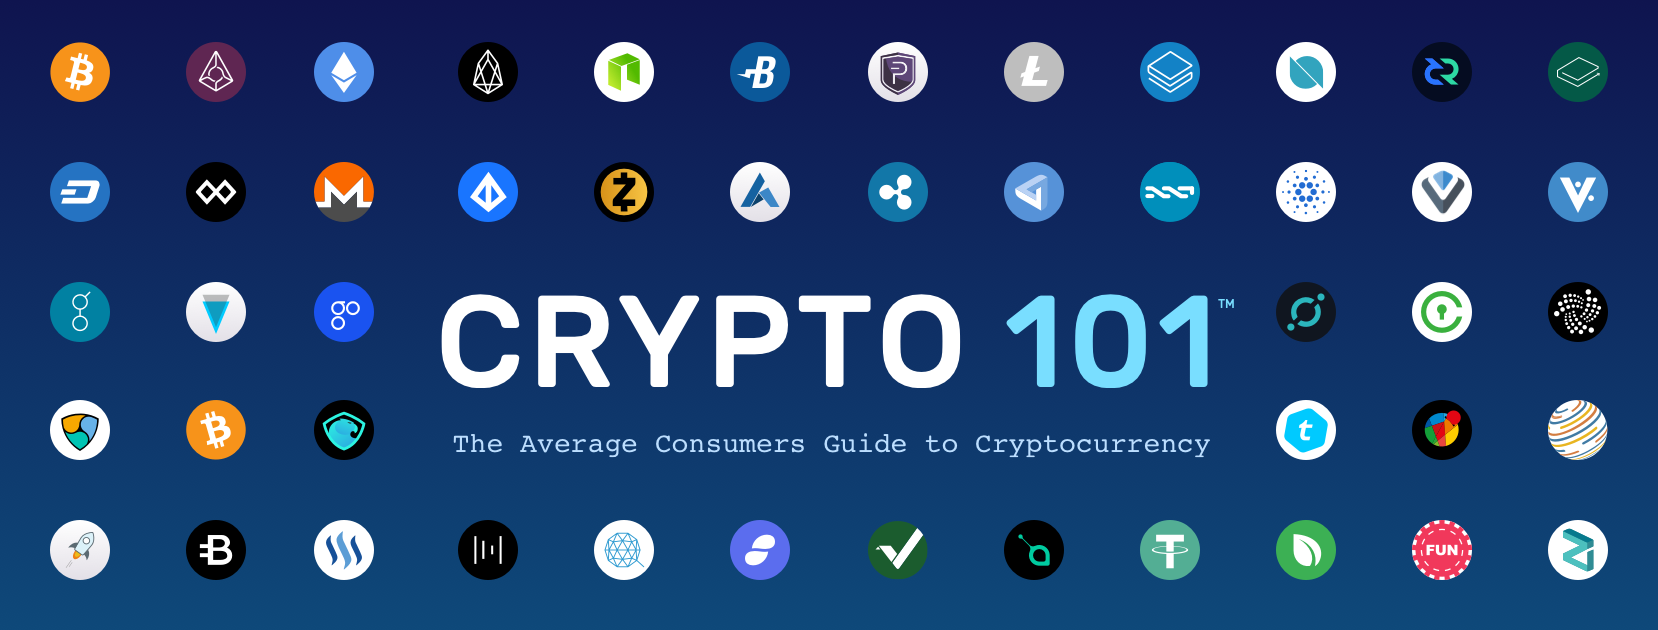 Facebook-829px-Banner-Crypto101 (1).png